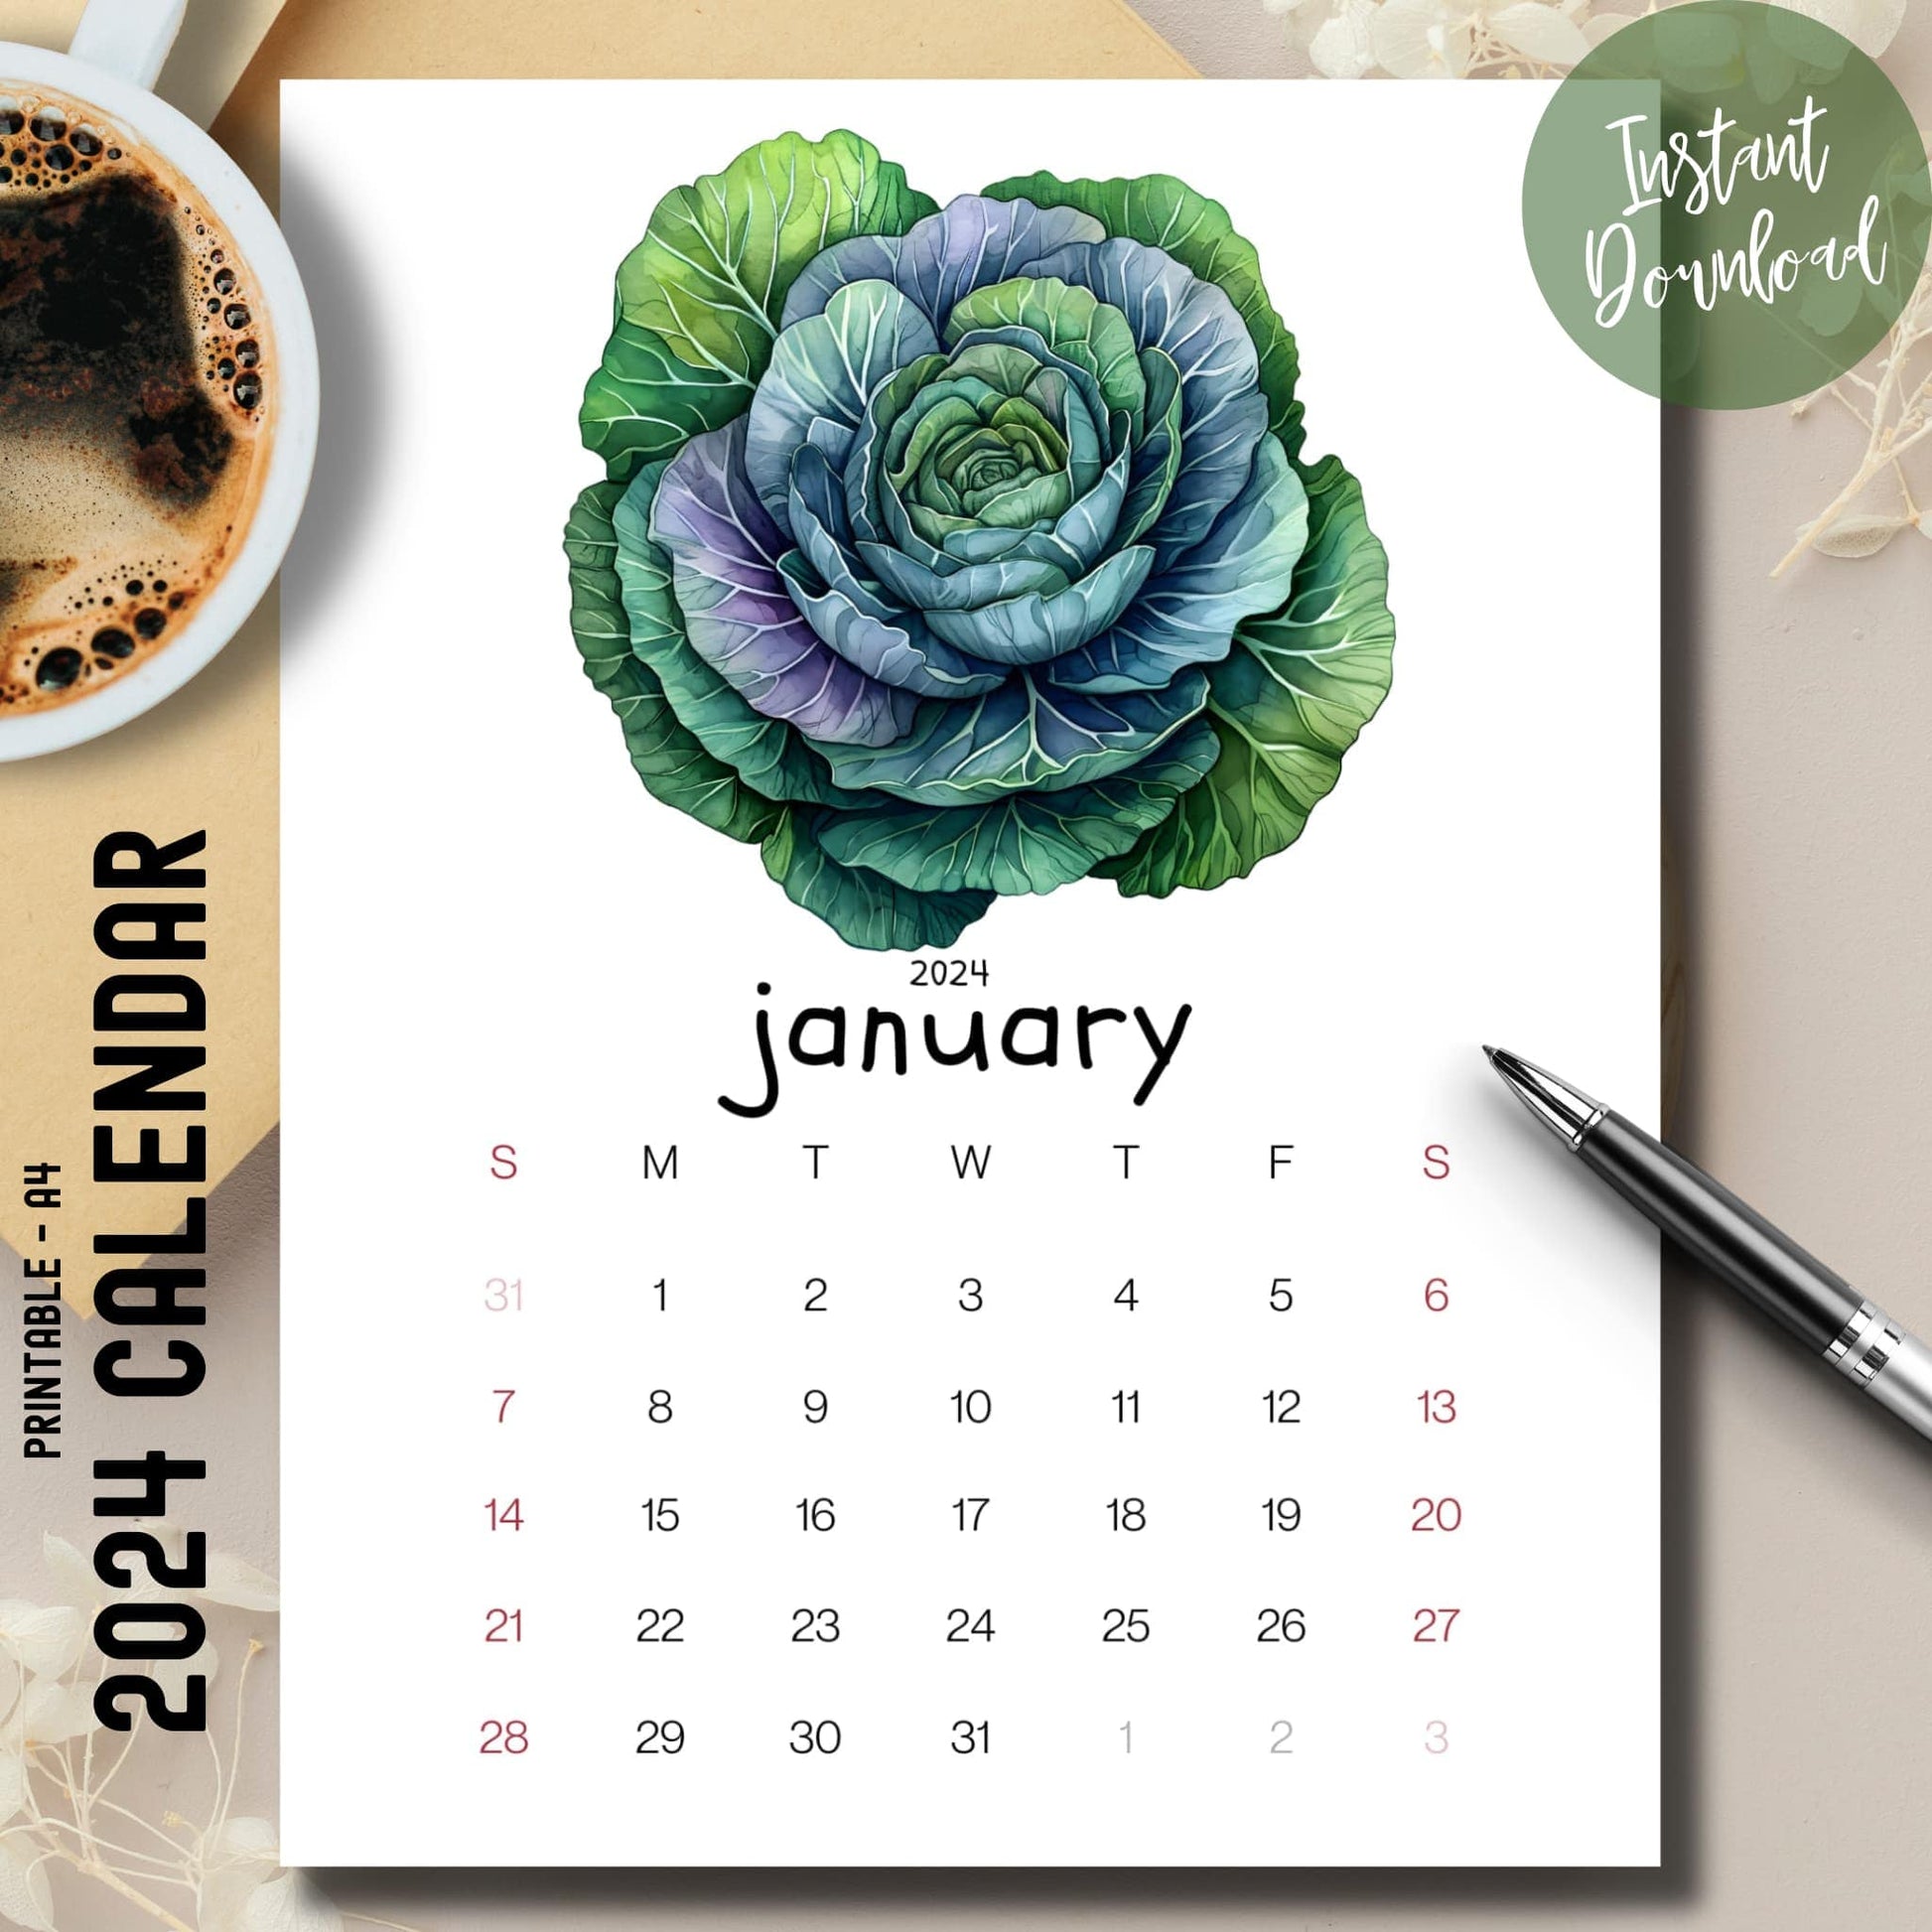 2024 full year ornamental cabbages calendar on a desk with a coffee cup on the left and a pen on the right.